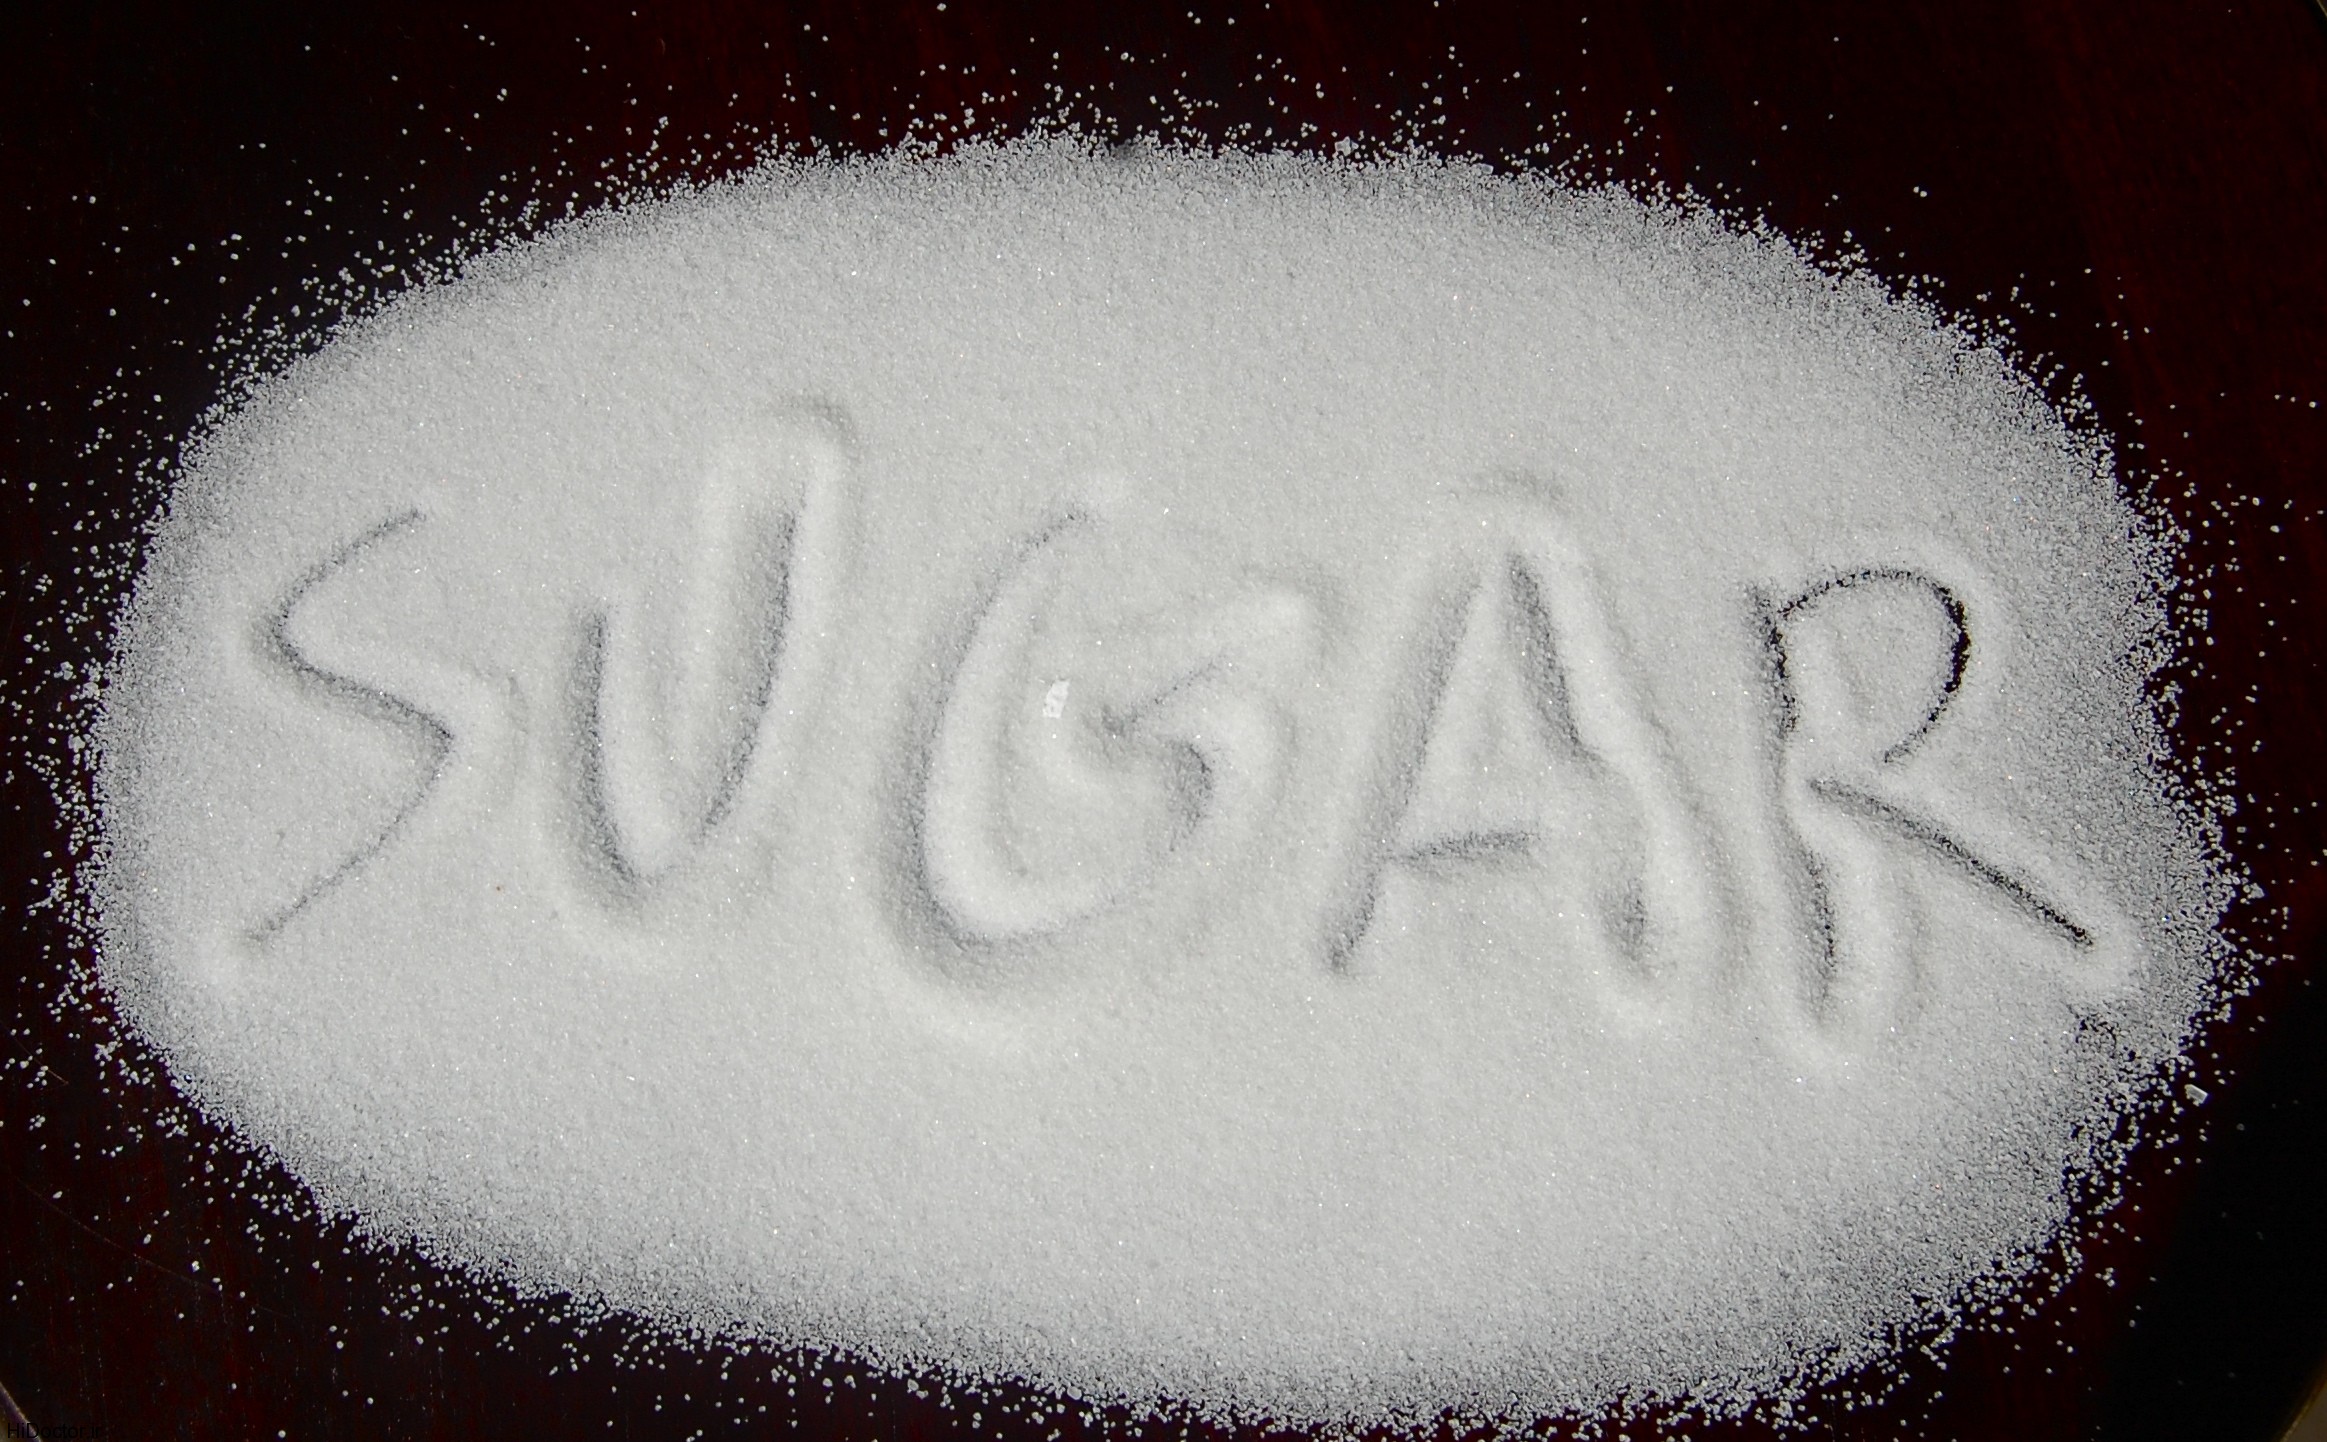 Sugar-has-a-direct-effect-on-heart-disease-risk-and-blood-pressure-Meta-analysis